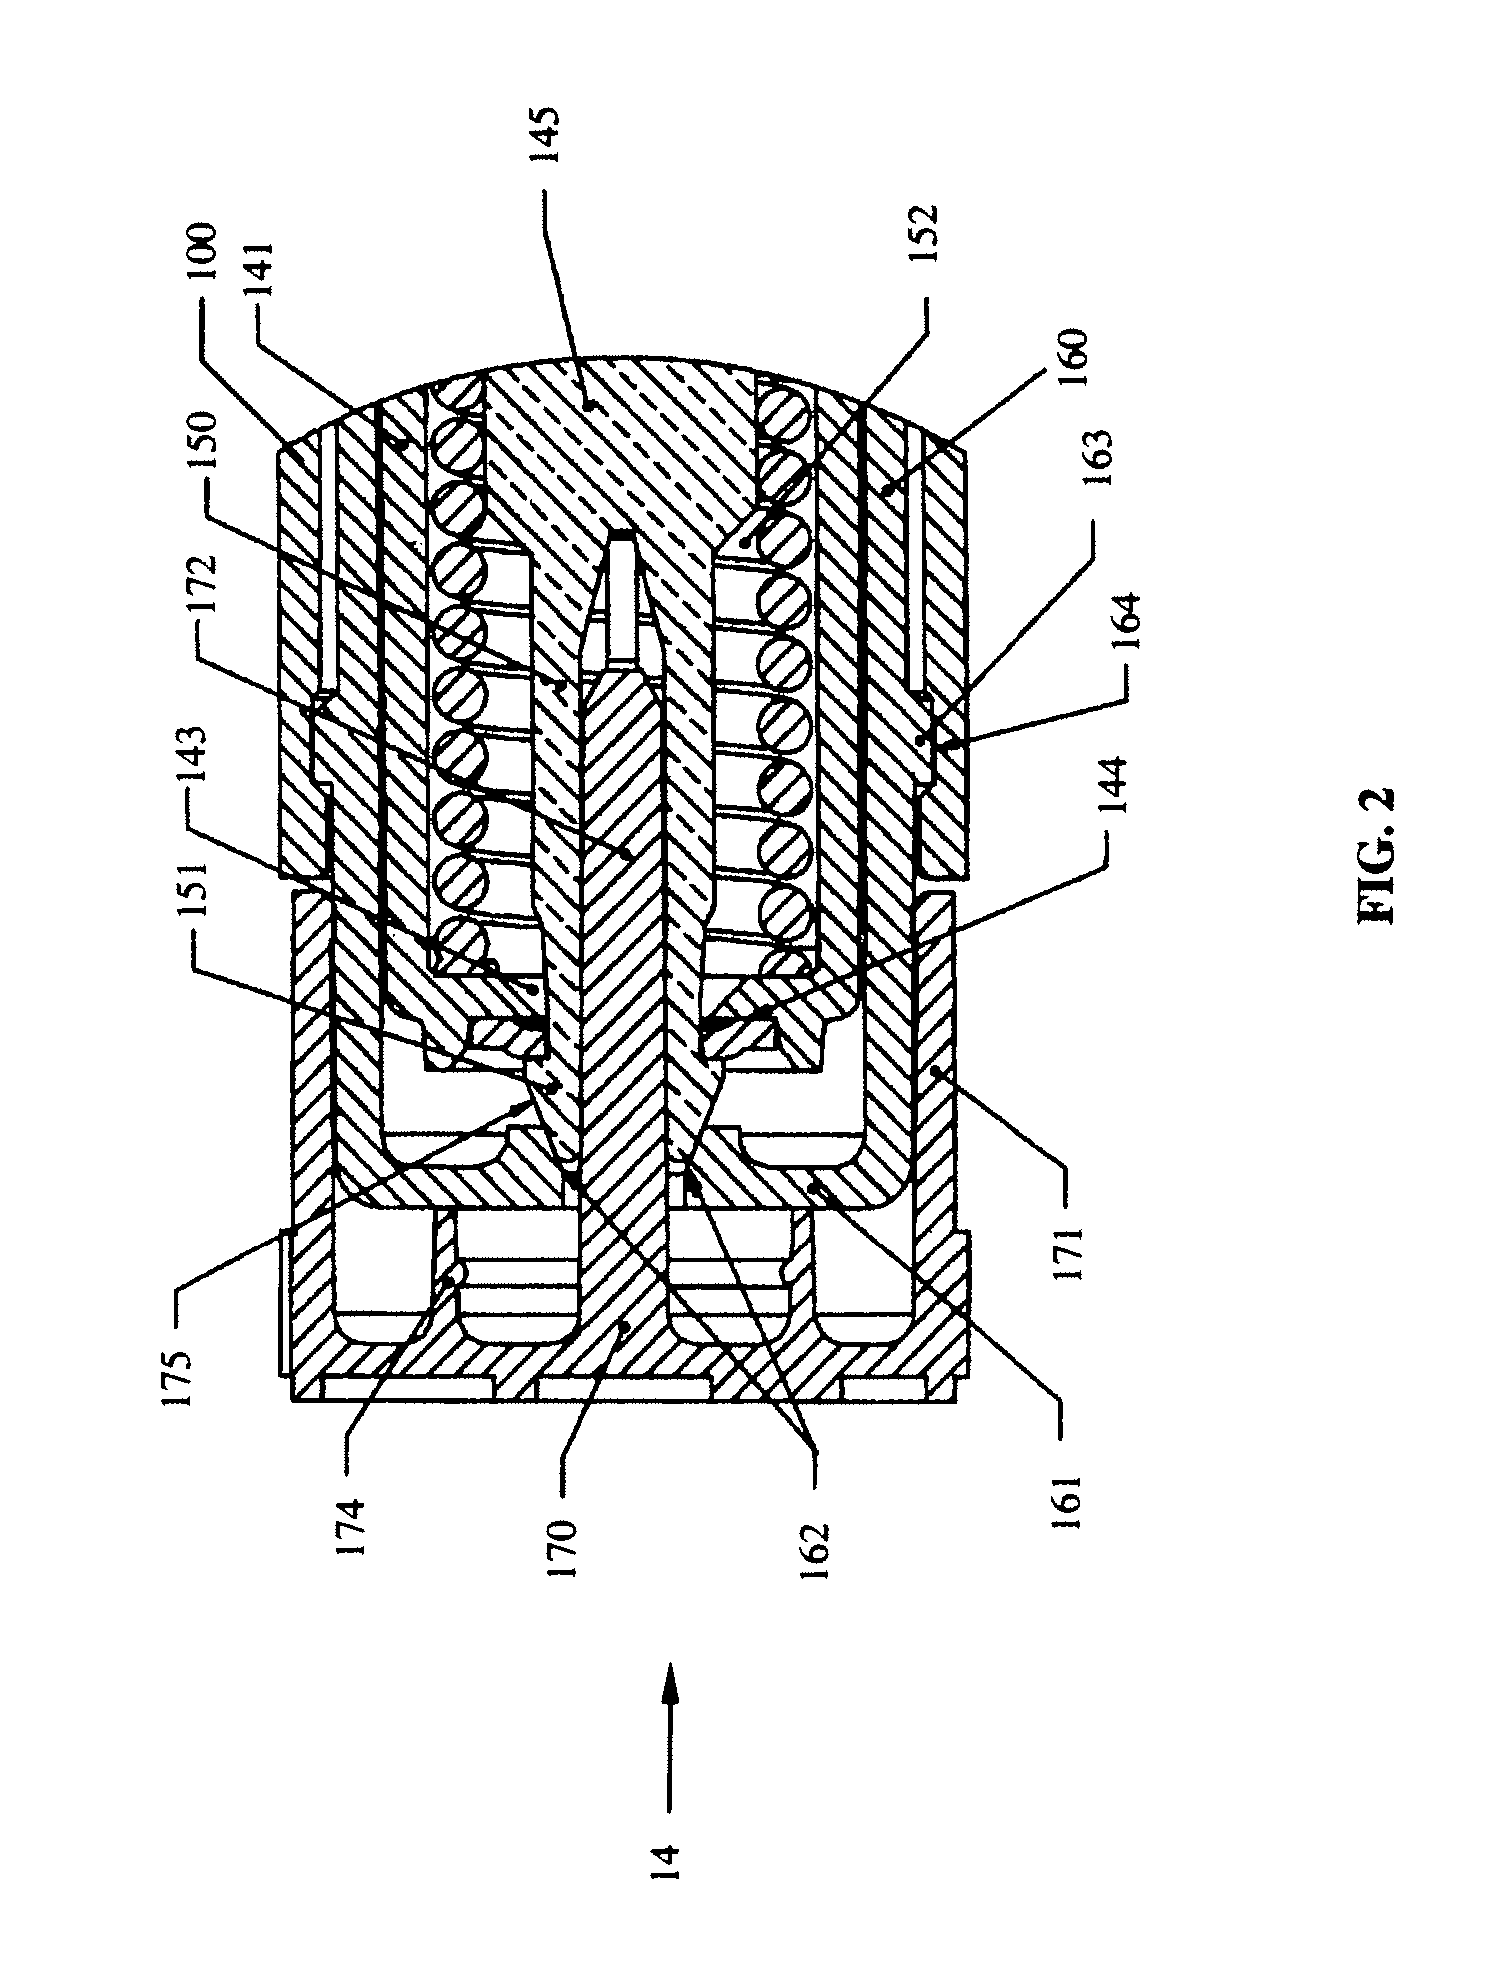 Vortex feature for drug delivery system